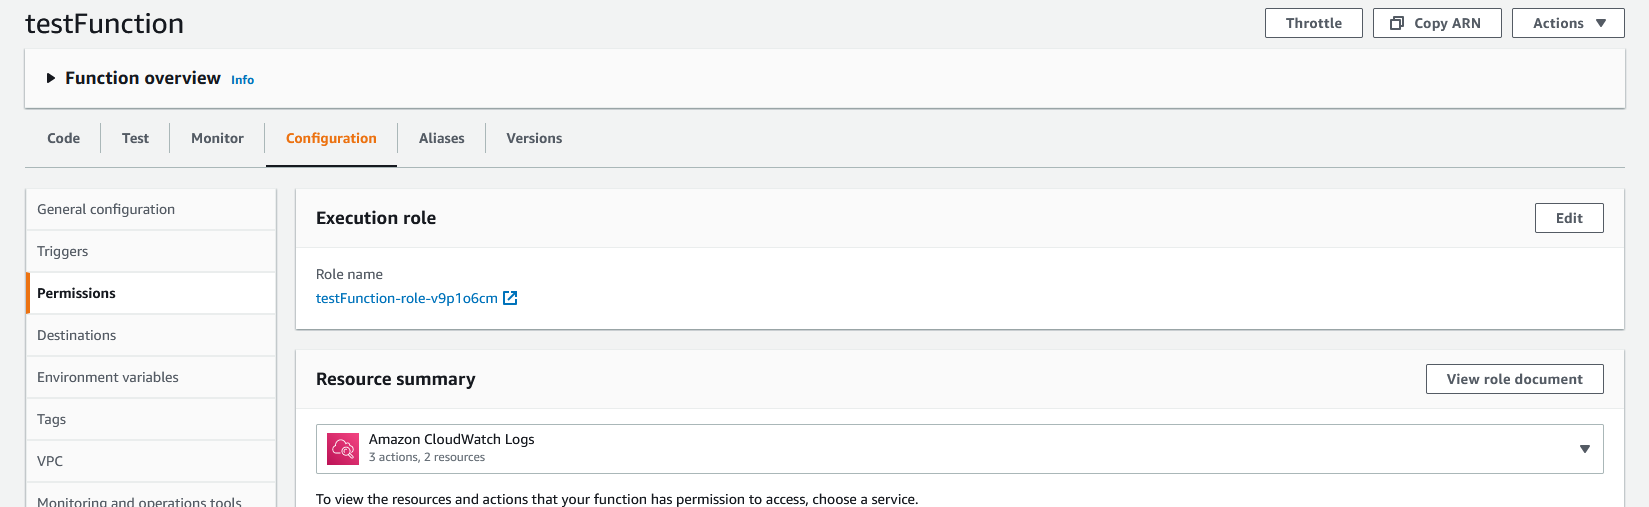 The configuration page for a lambda function with the left navigation set to Permissions. The top panel is an "Execution role" with a clickable role name shown.